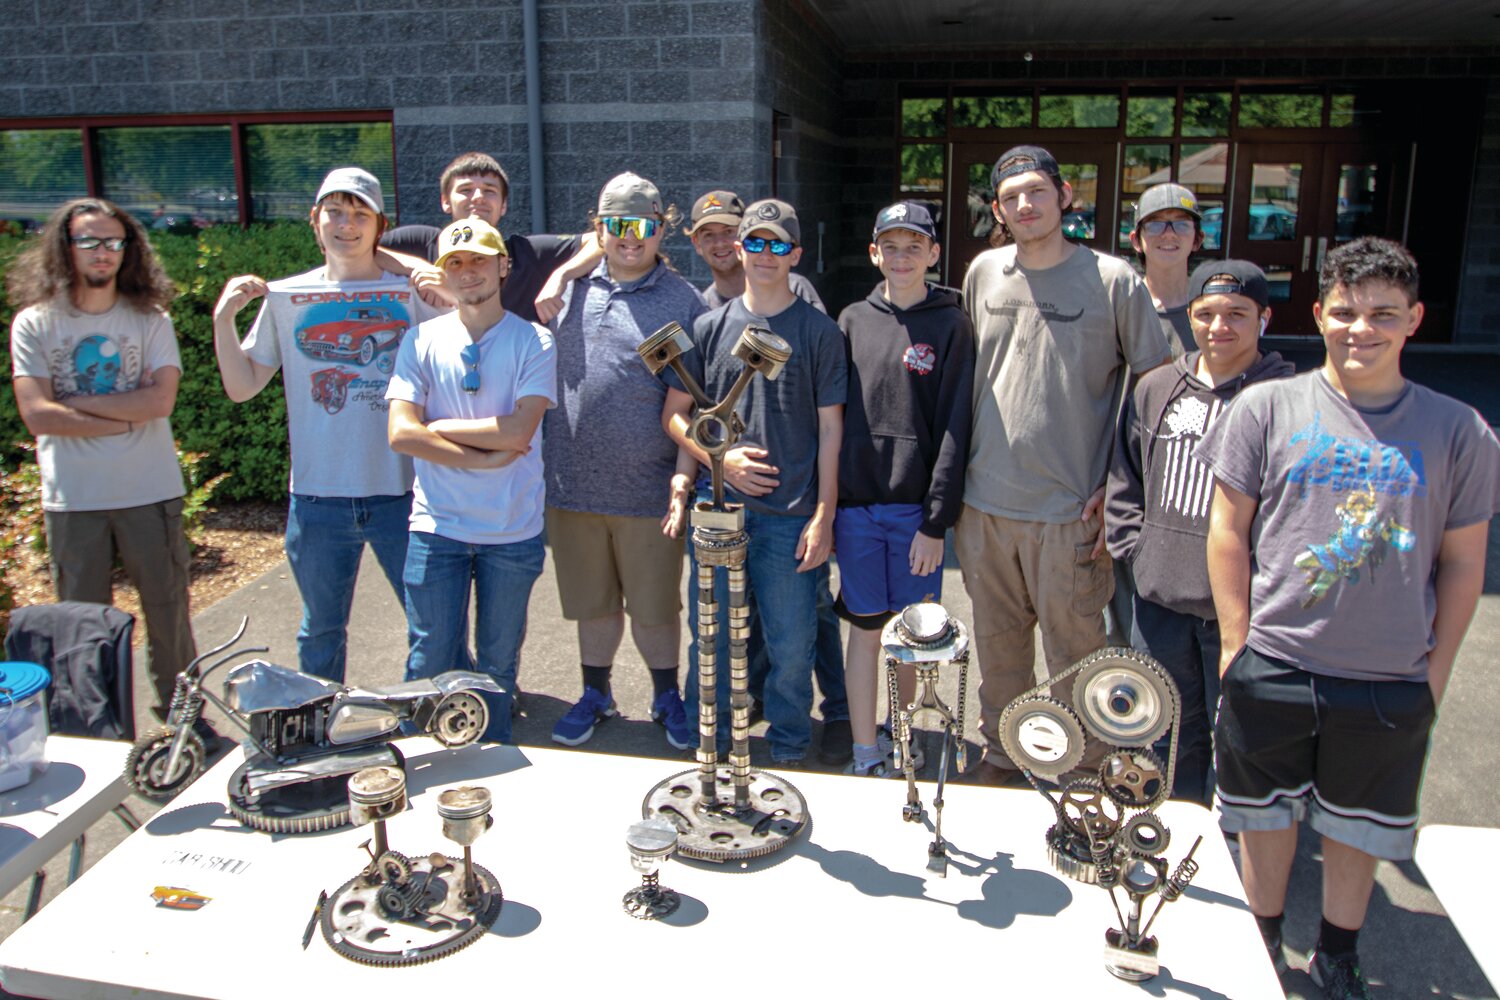 Members of Yelm High School’s SkillsUSA automotive, welding and manufacturing clubs pose in front of the trophies they made for the car show on June 4 at the high school. The car show served as a fundraiser for their clubs.